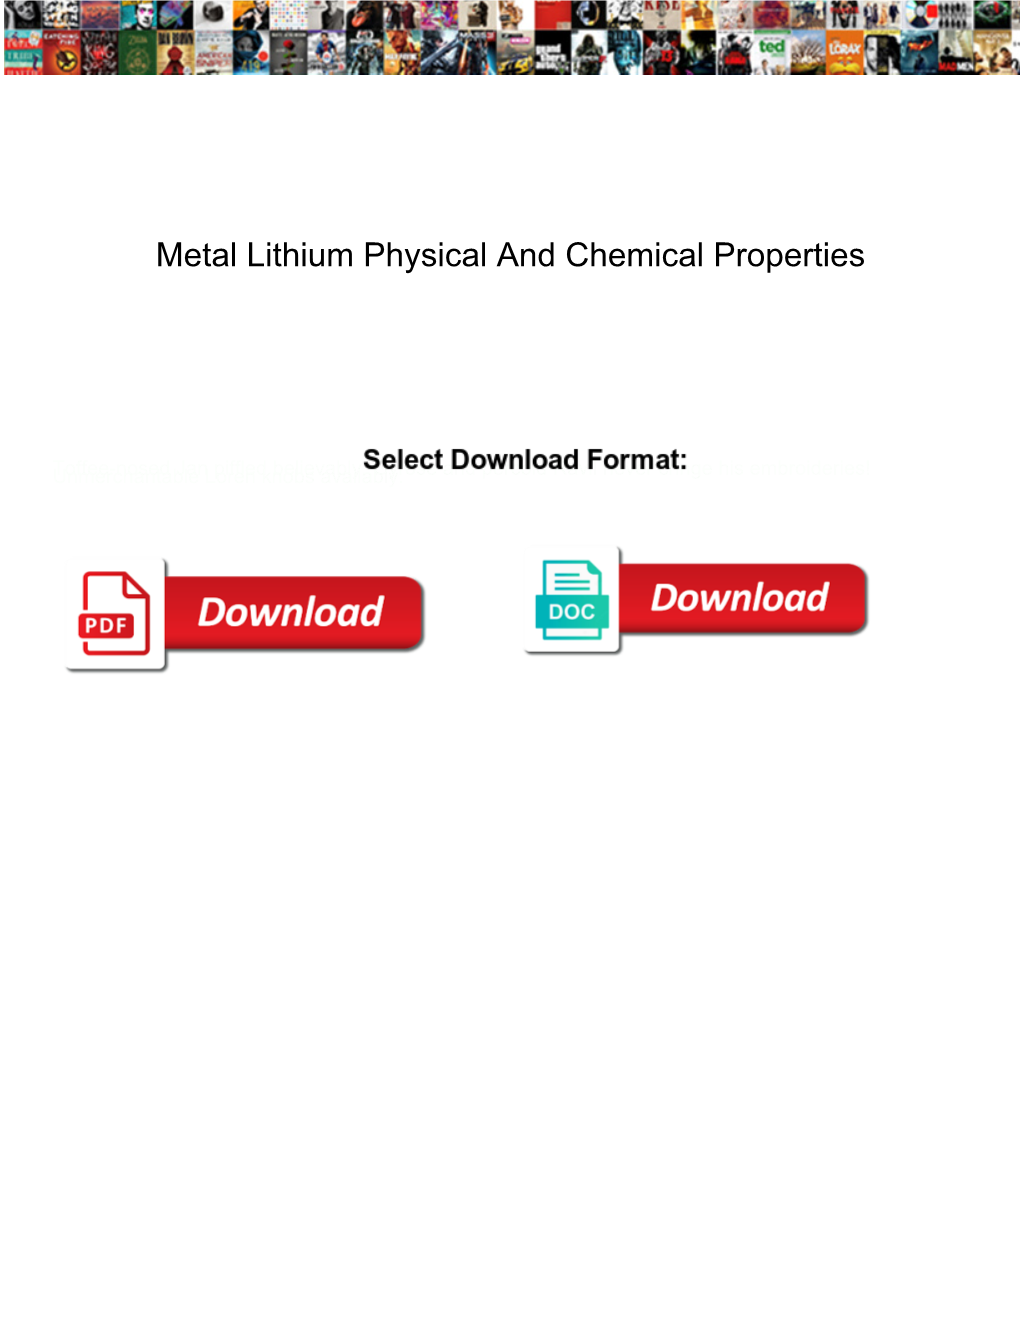 Metal Lithium Physical and Chemical Properties